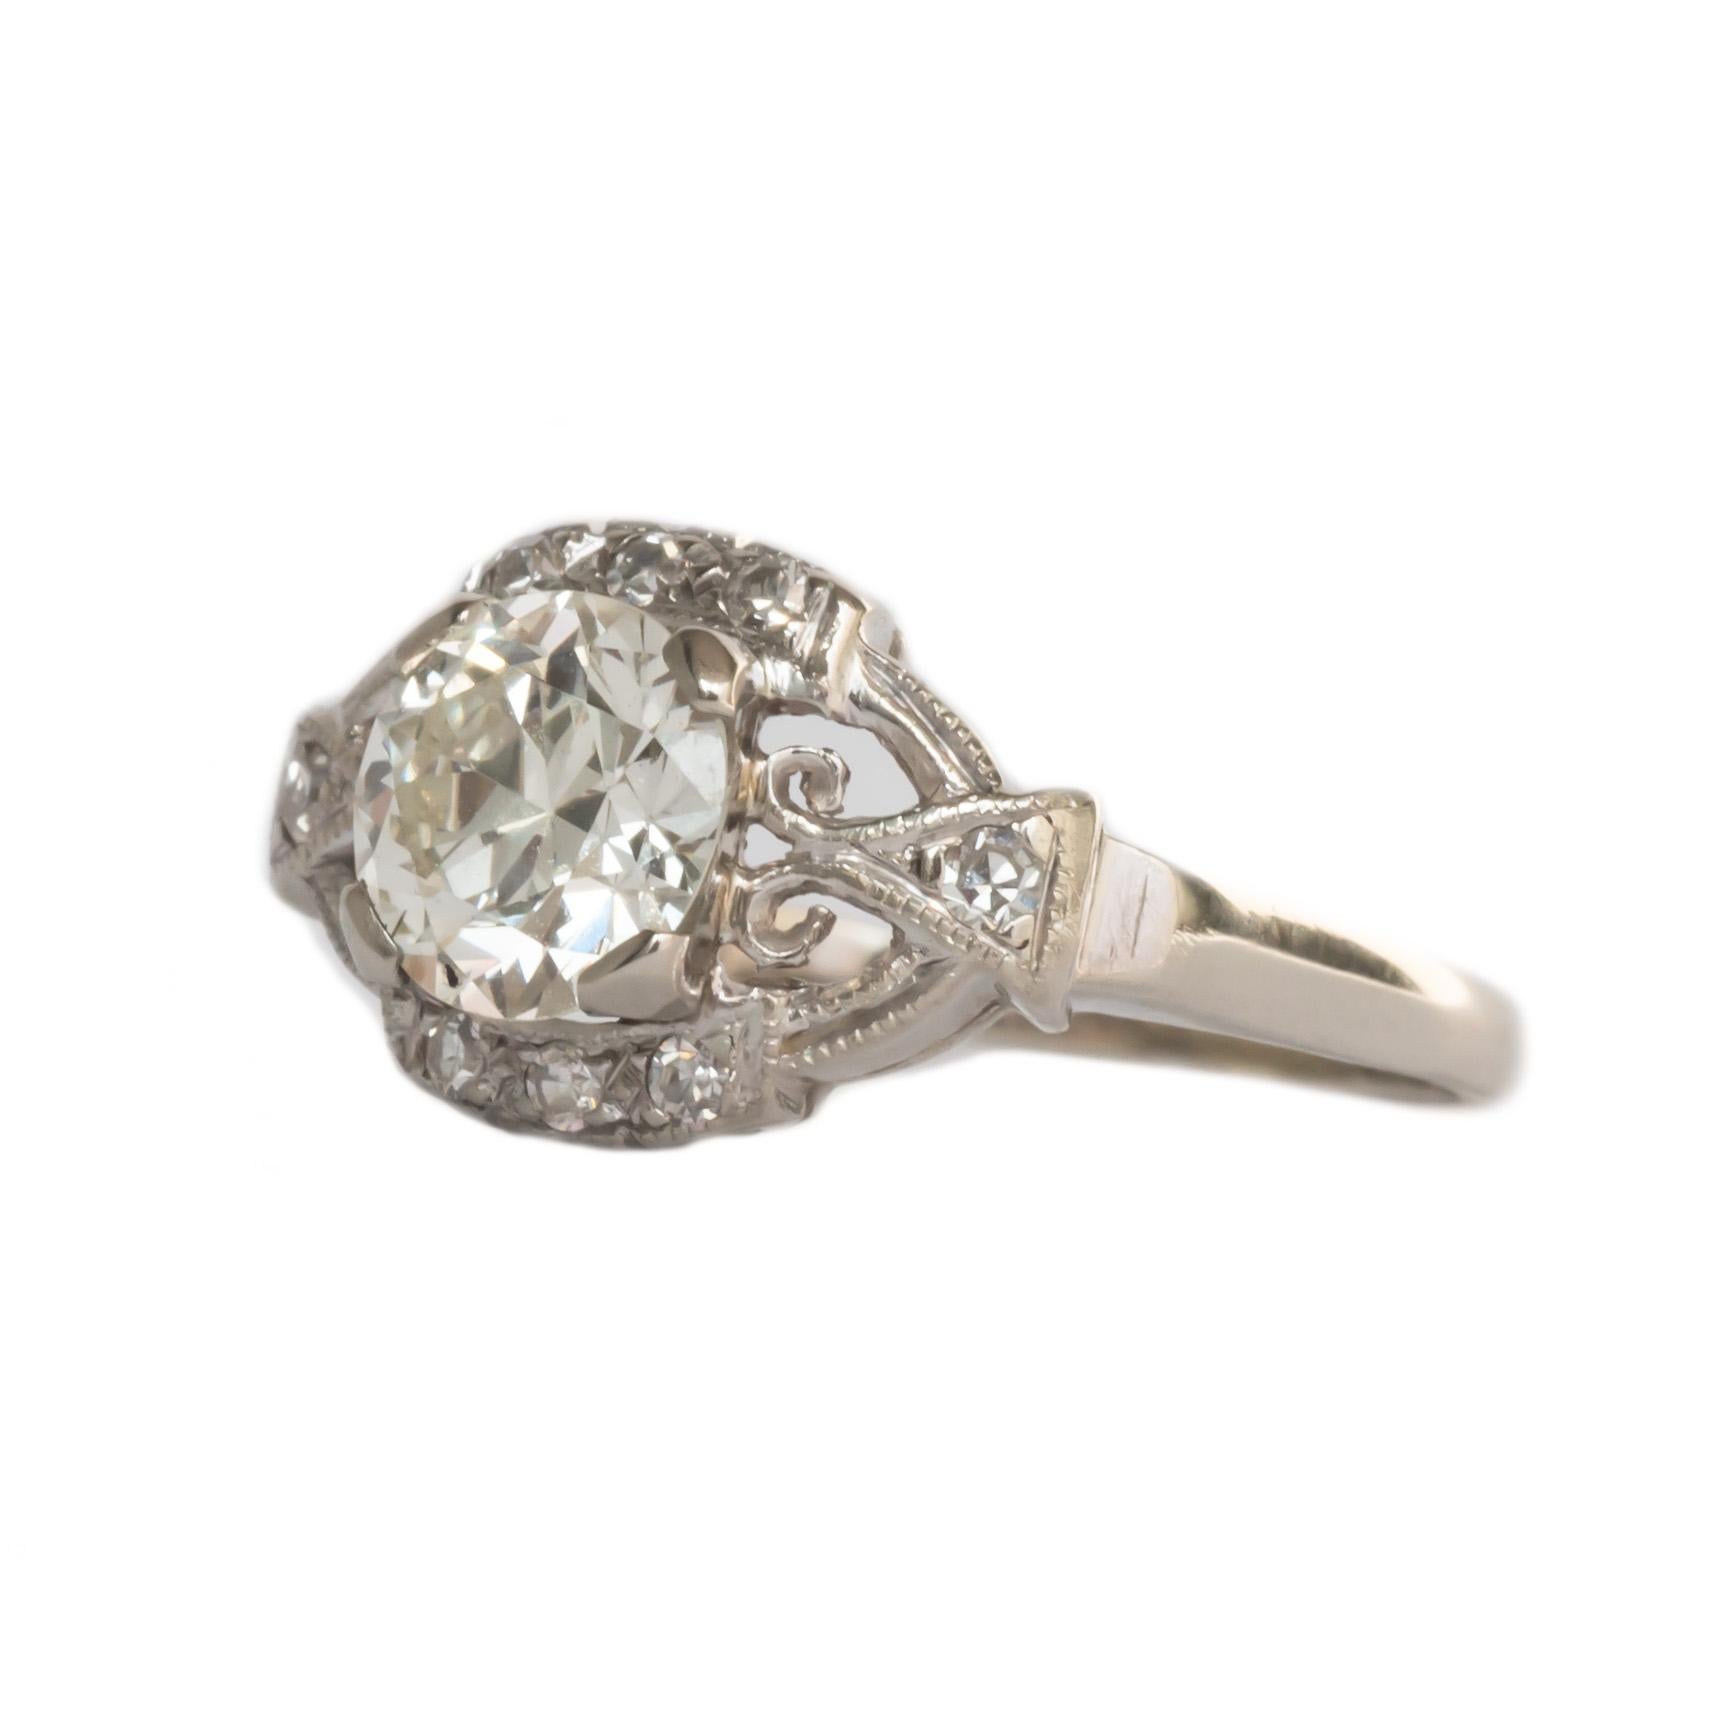 Item Details: 
Ring Size: 4.25
Metal Type: Platinum  [Hallmarked & Tested]
Weight: 3 grams

Center Stone Details:
Weight: .97 carat
Cut: Old European Brilliant
Color: I-J
Clarity: VS1

Side Stone Details: 
Shape: Old European
Total Carat Weight: .10